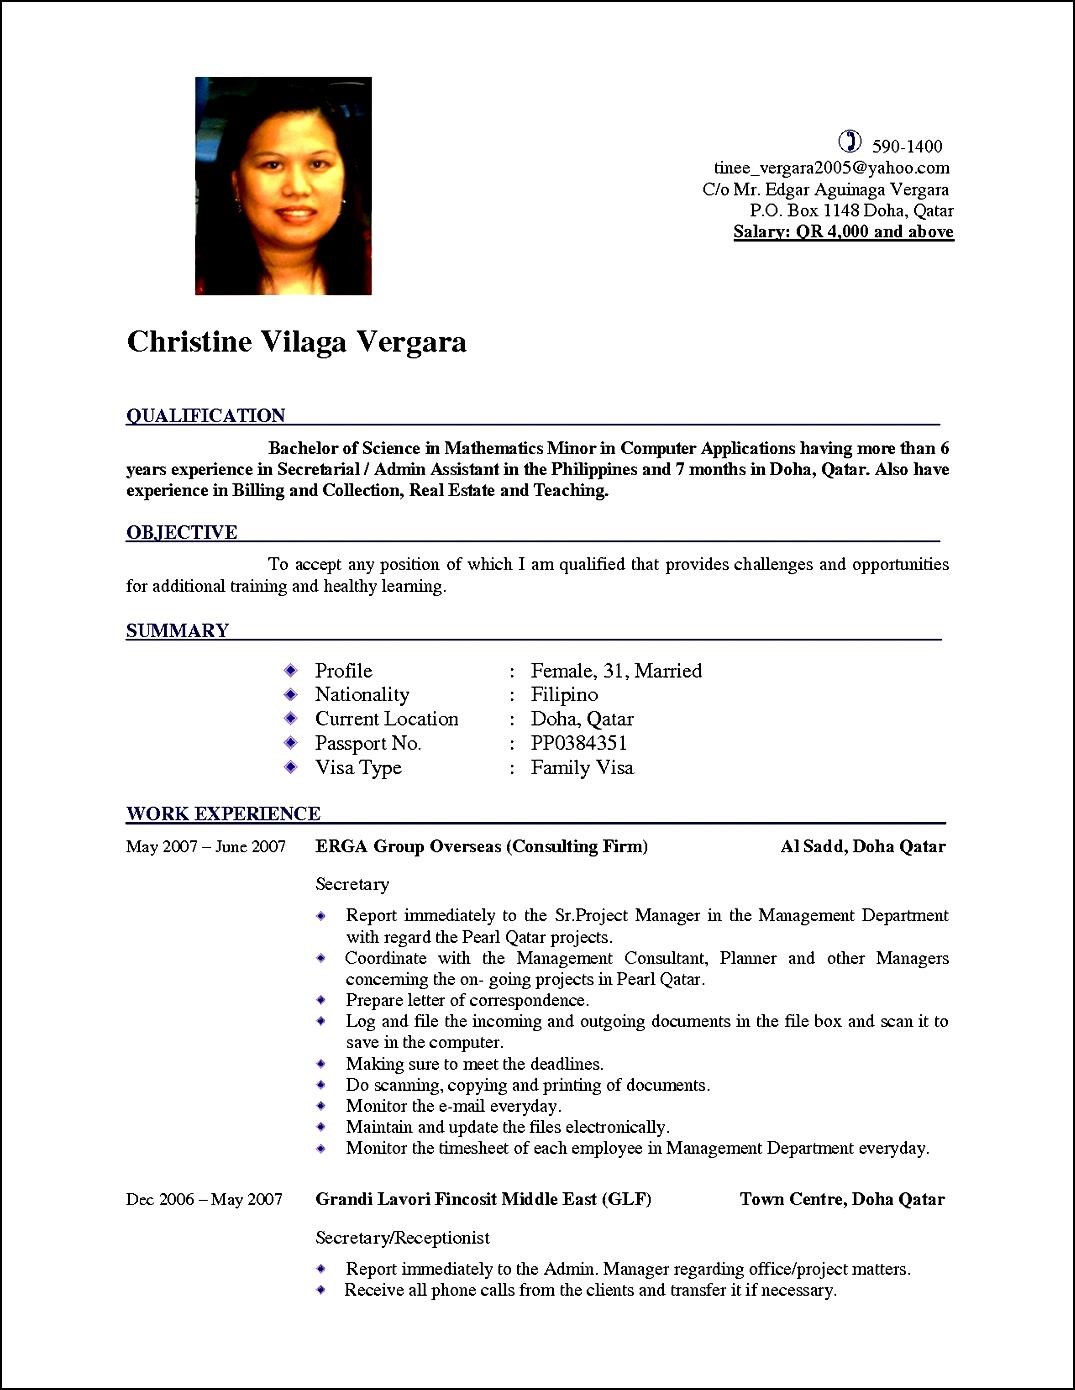 RESUME WRITING EXAMPLES